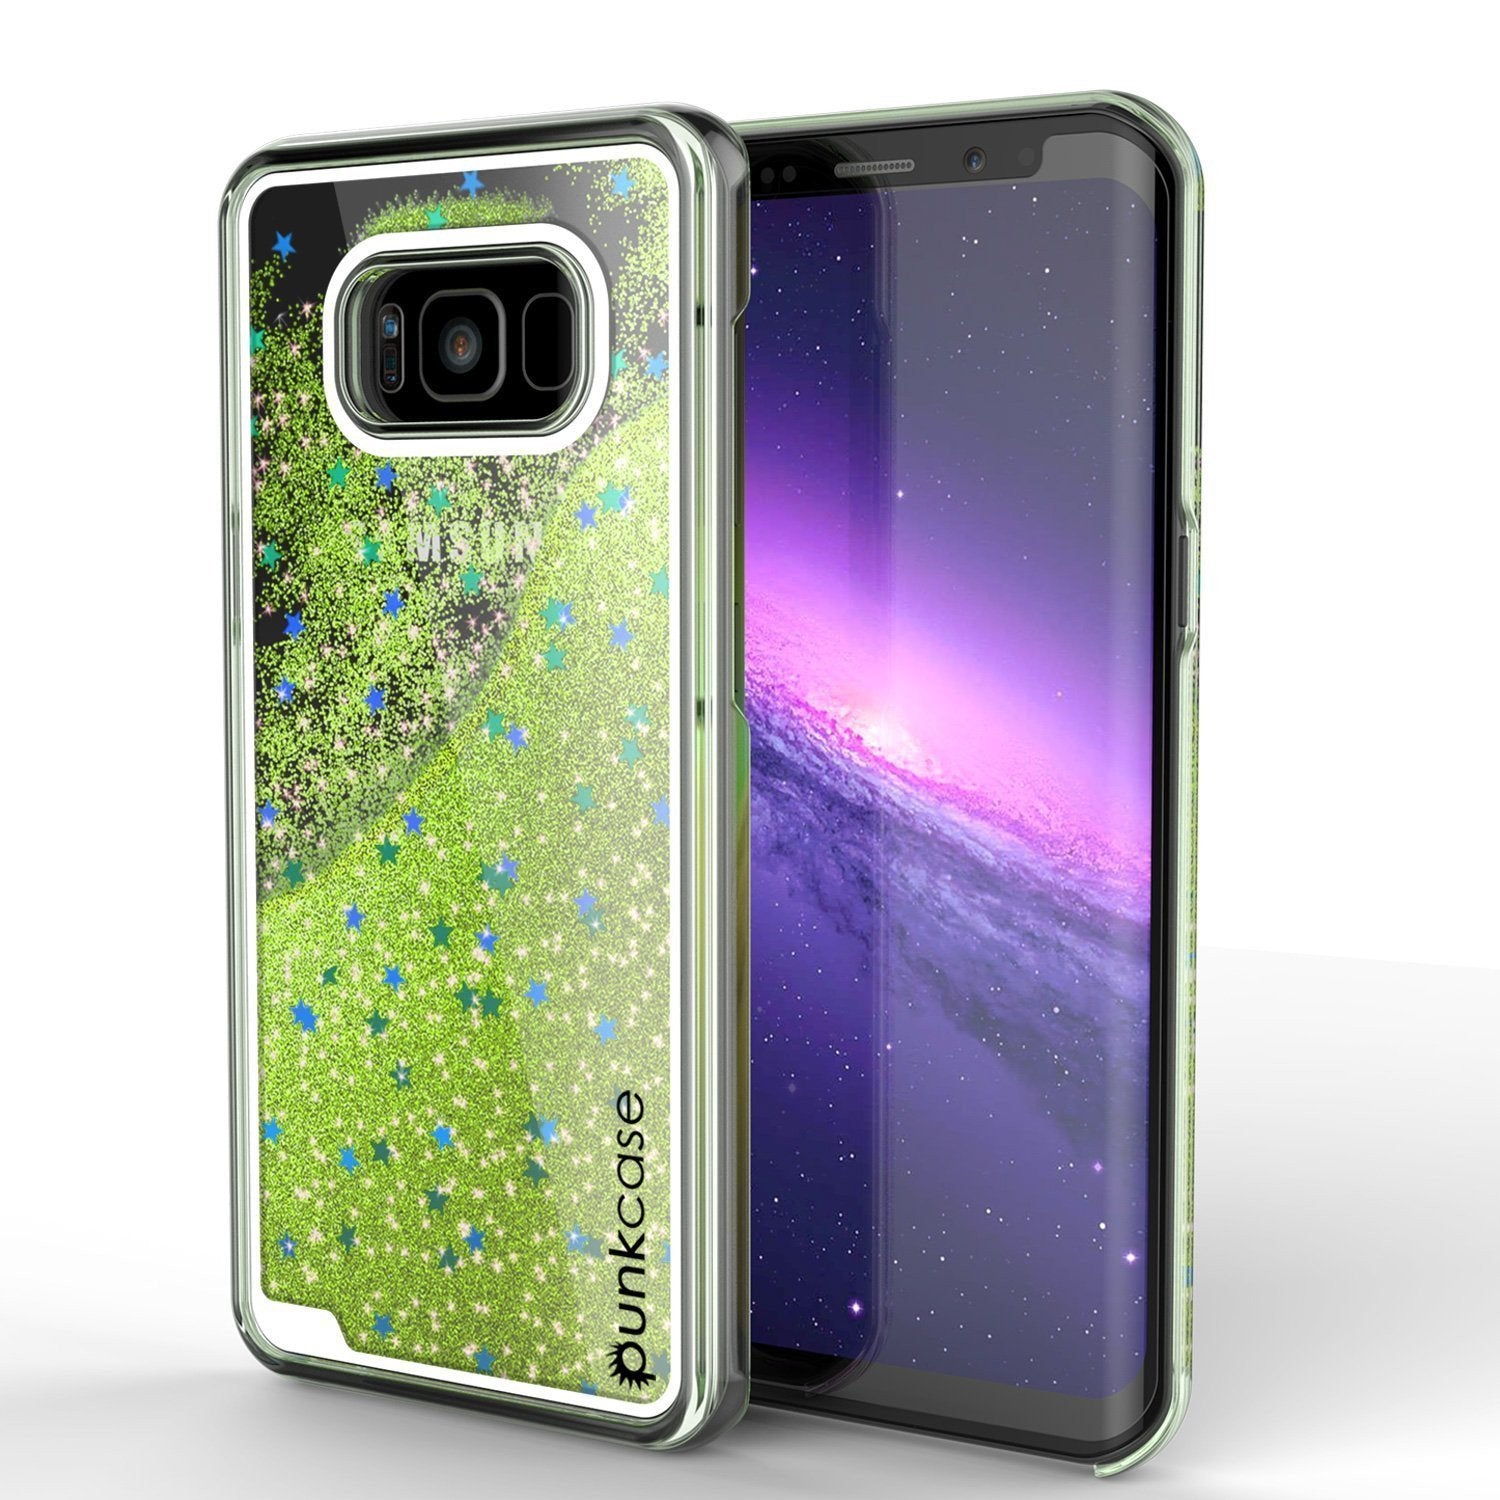 Galaxy S8 Case, Punkcase [Liquid Series] Protective Dual Layer Floating Glitter Cover with lots of Bling & Sparkle + PunkShield Screen Protector for Samsung S8 [Light Green]